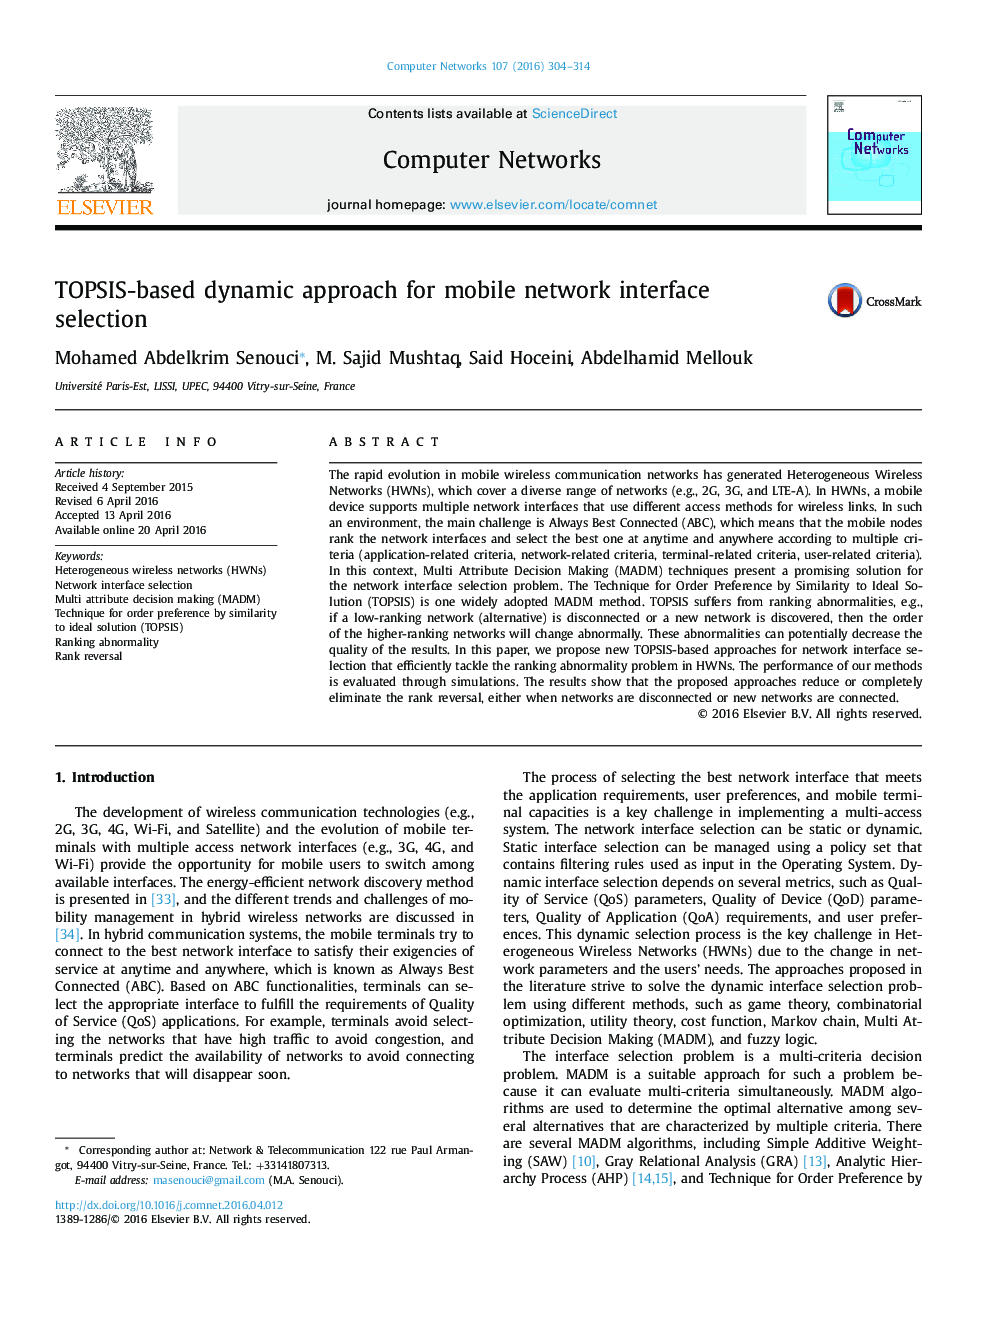 TOPSIS-based dynamic approach for mobile network interface selection